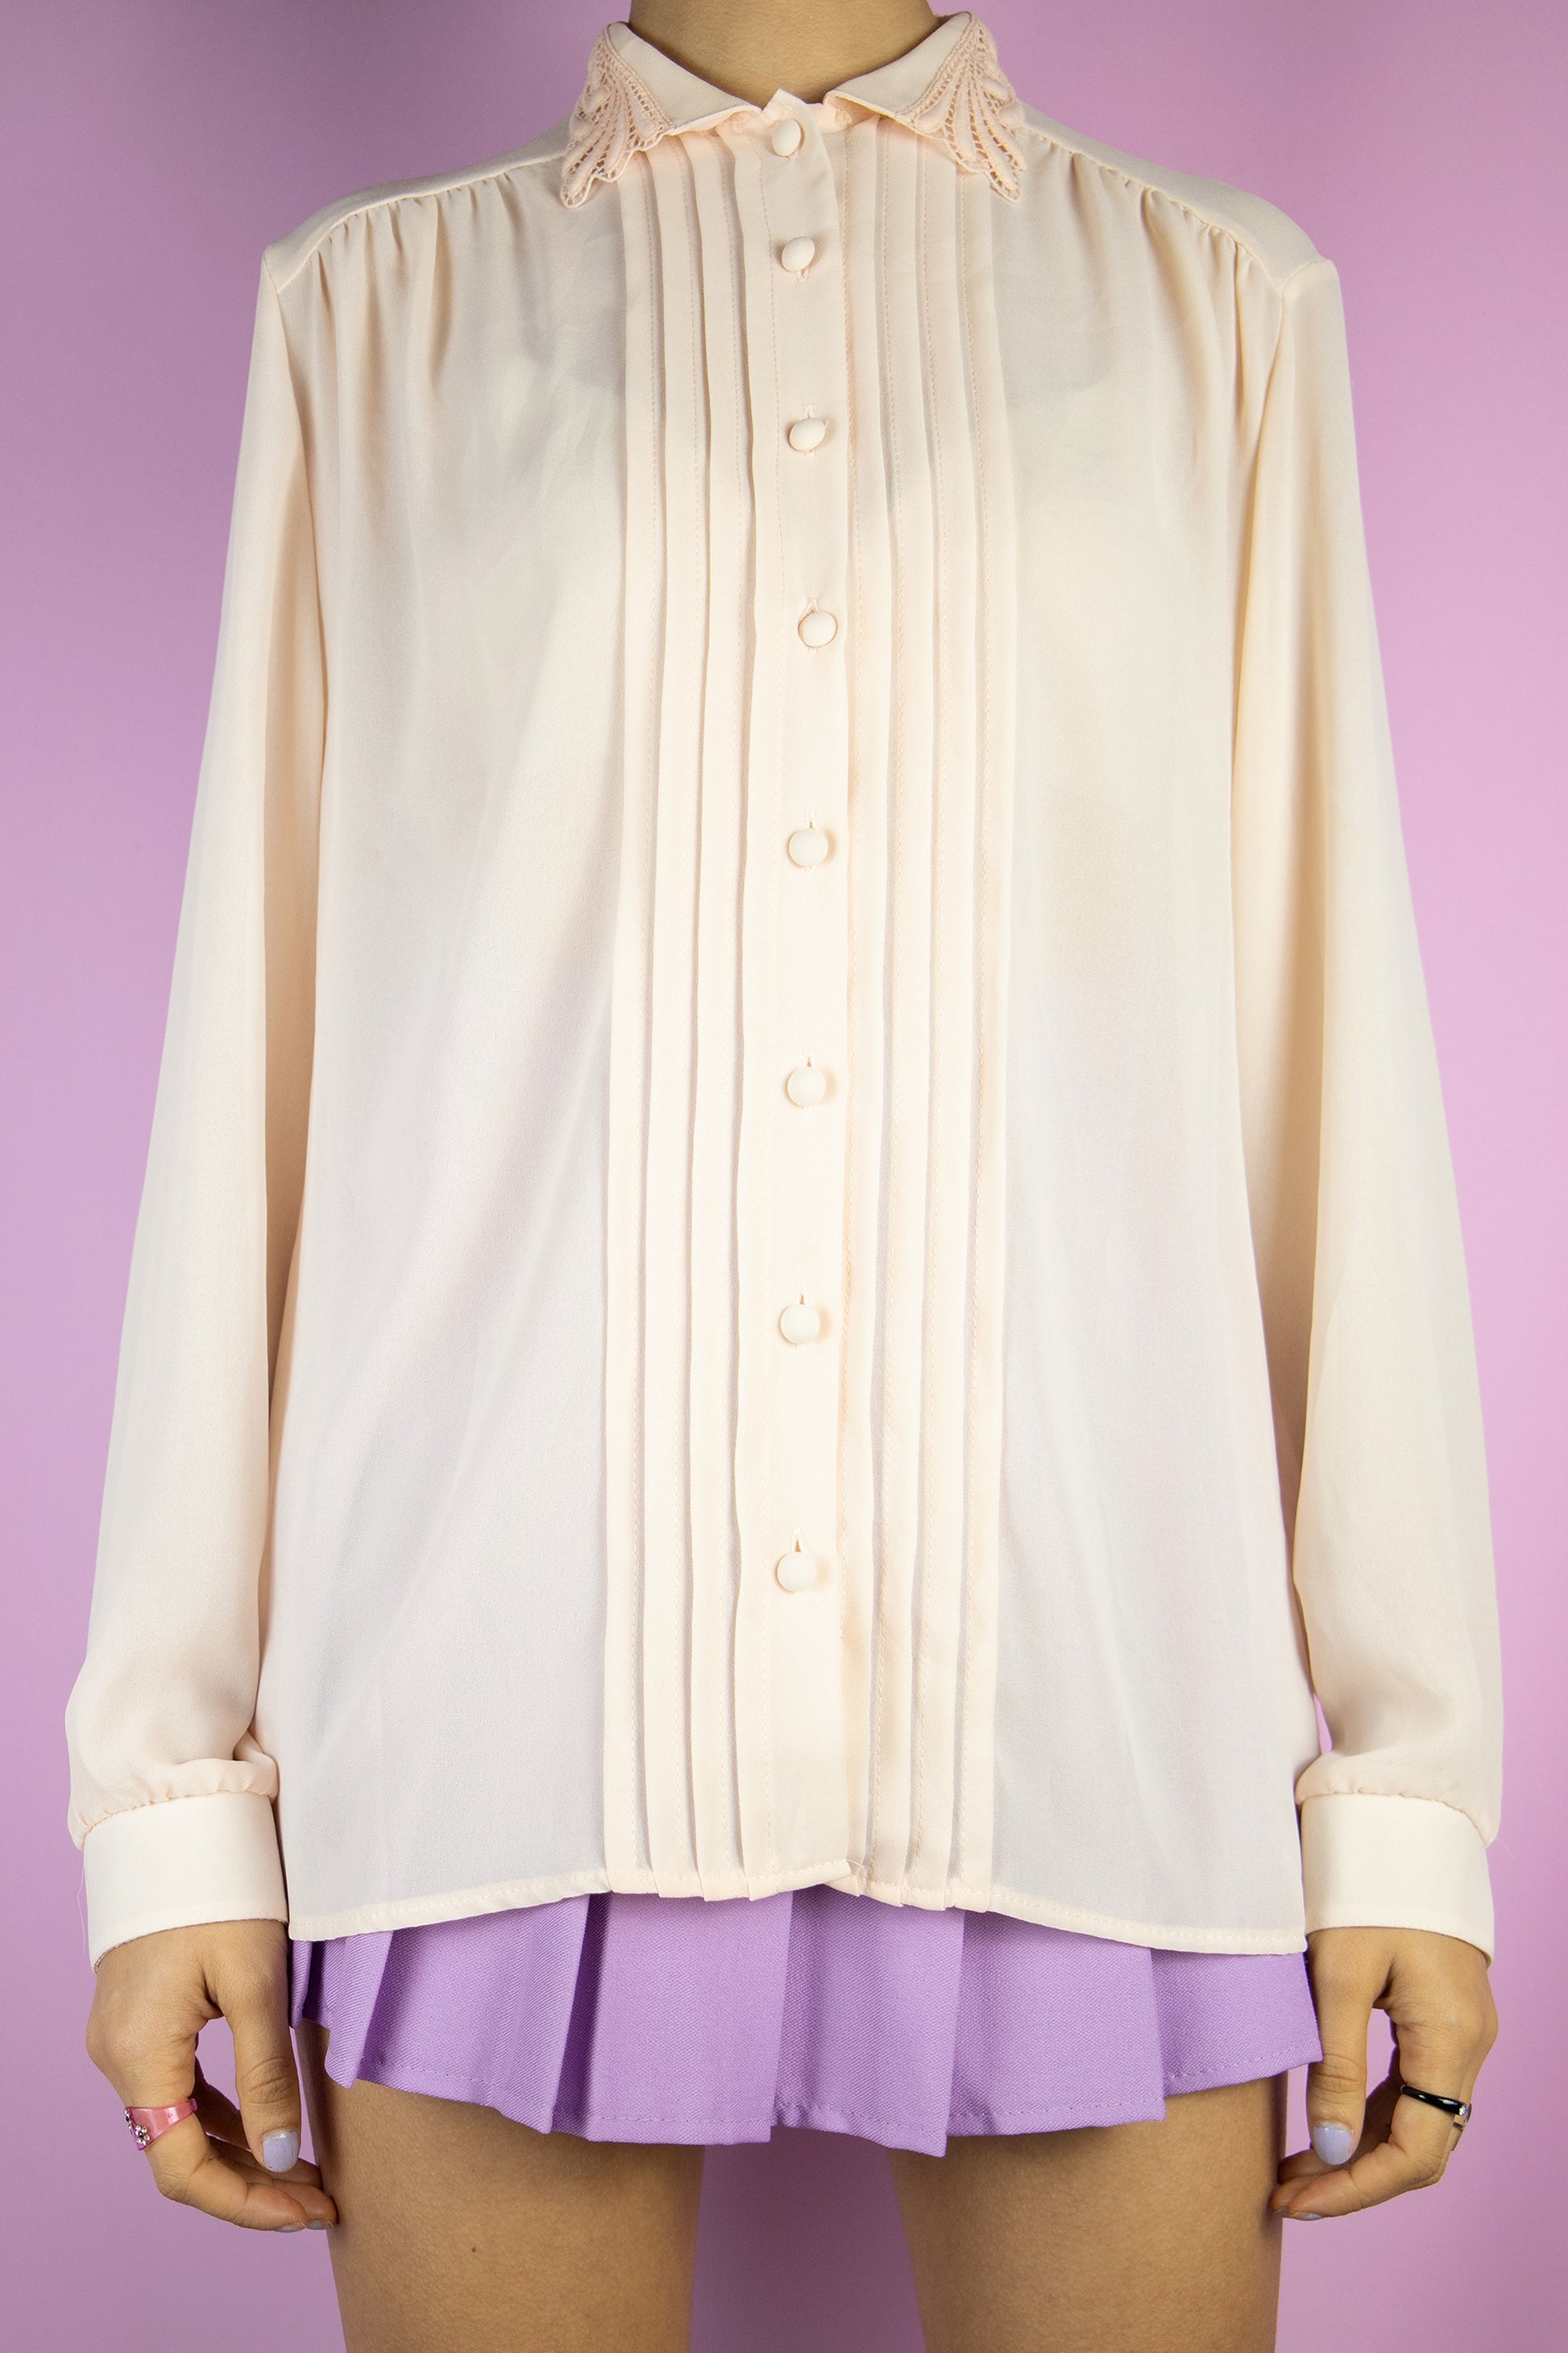 The Vintage 80s Light Pink Romantic Blouse is a semi sheer light pastel pink shirt with pleated front, collar and buttons. Preppy retro 1980s blouse.